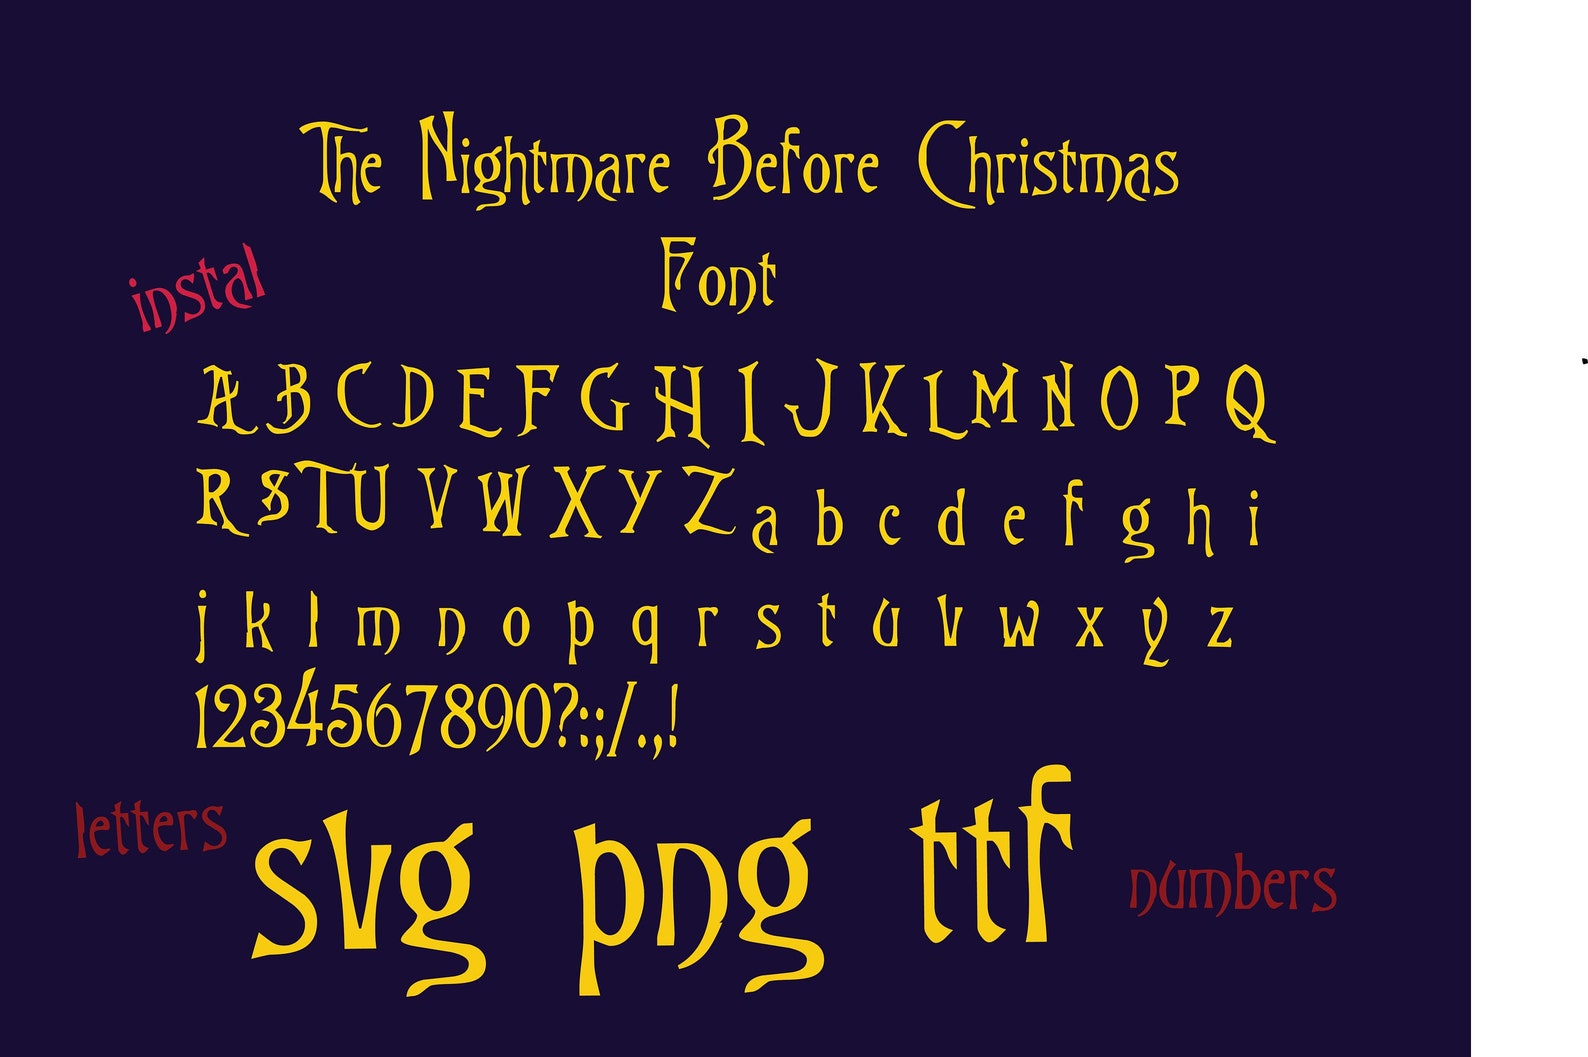 The NIGHTMARE BEFORE CHRISTMAS Font / Alphabet Nightmare | Etsy